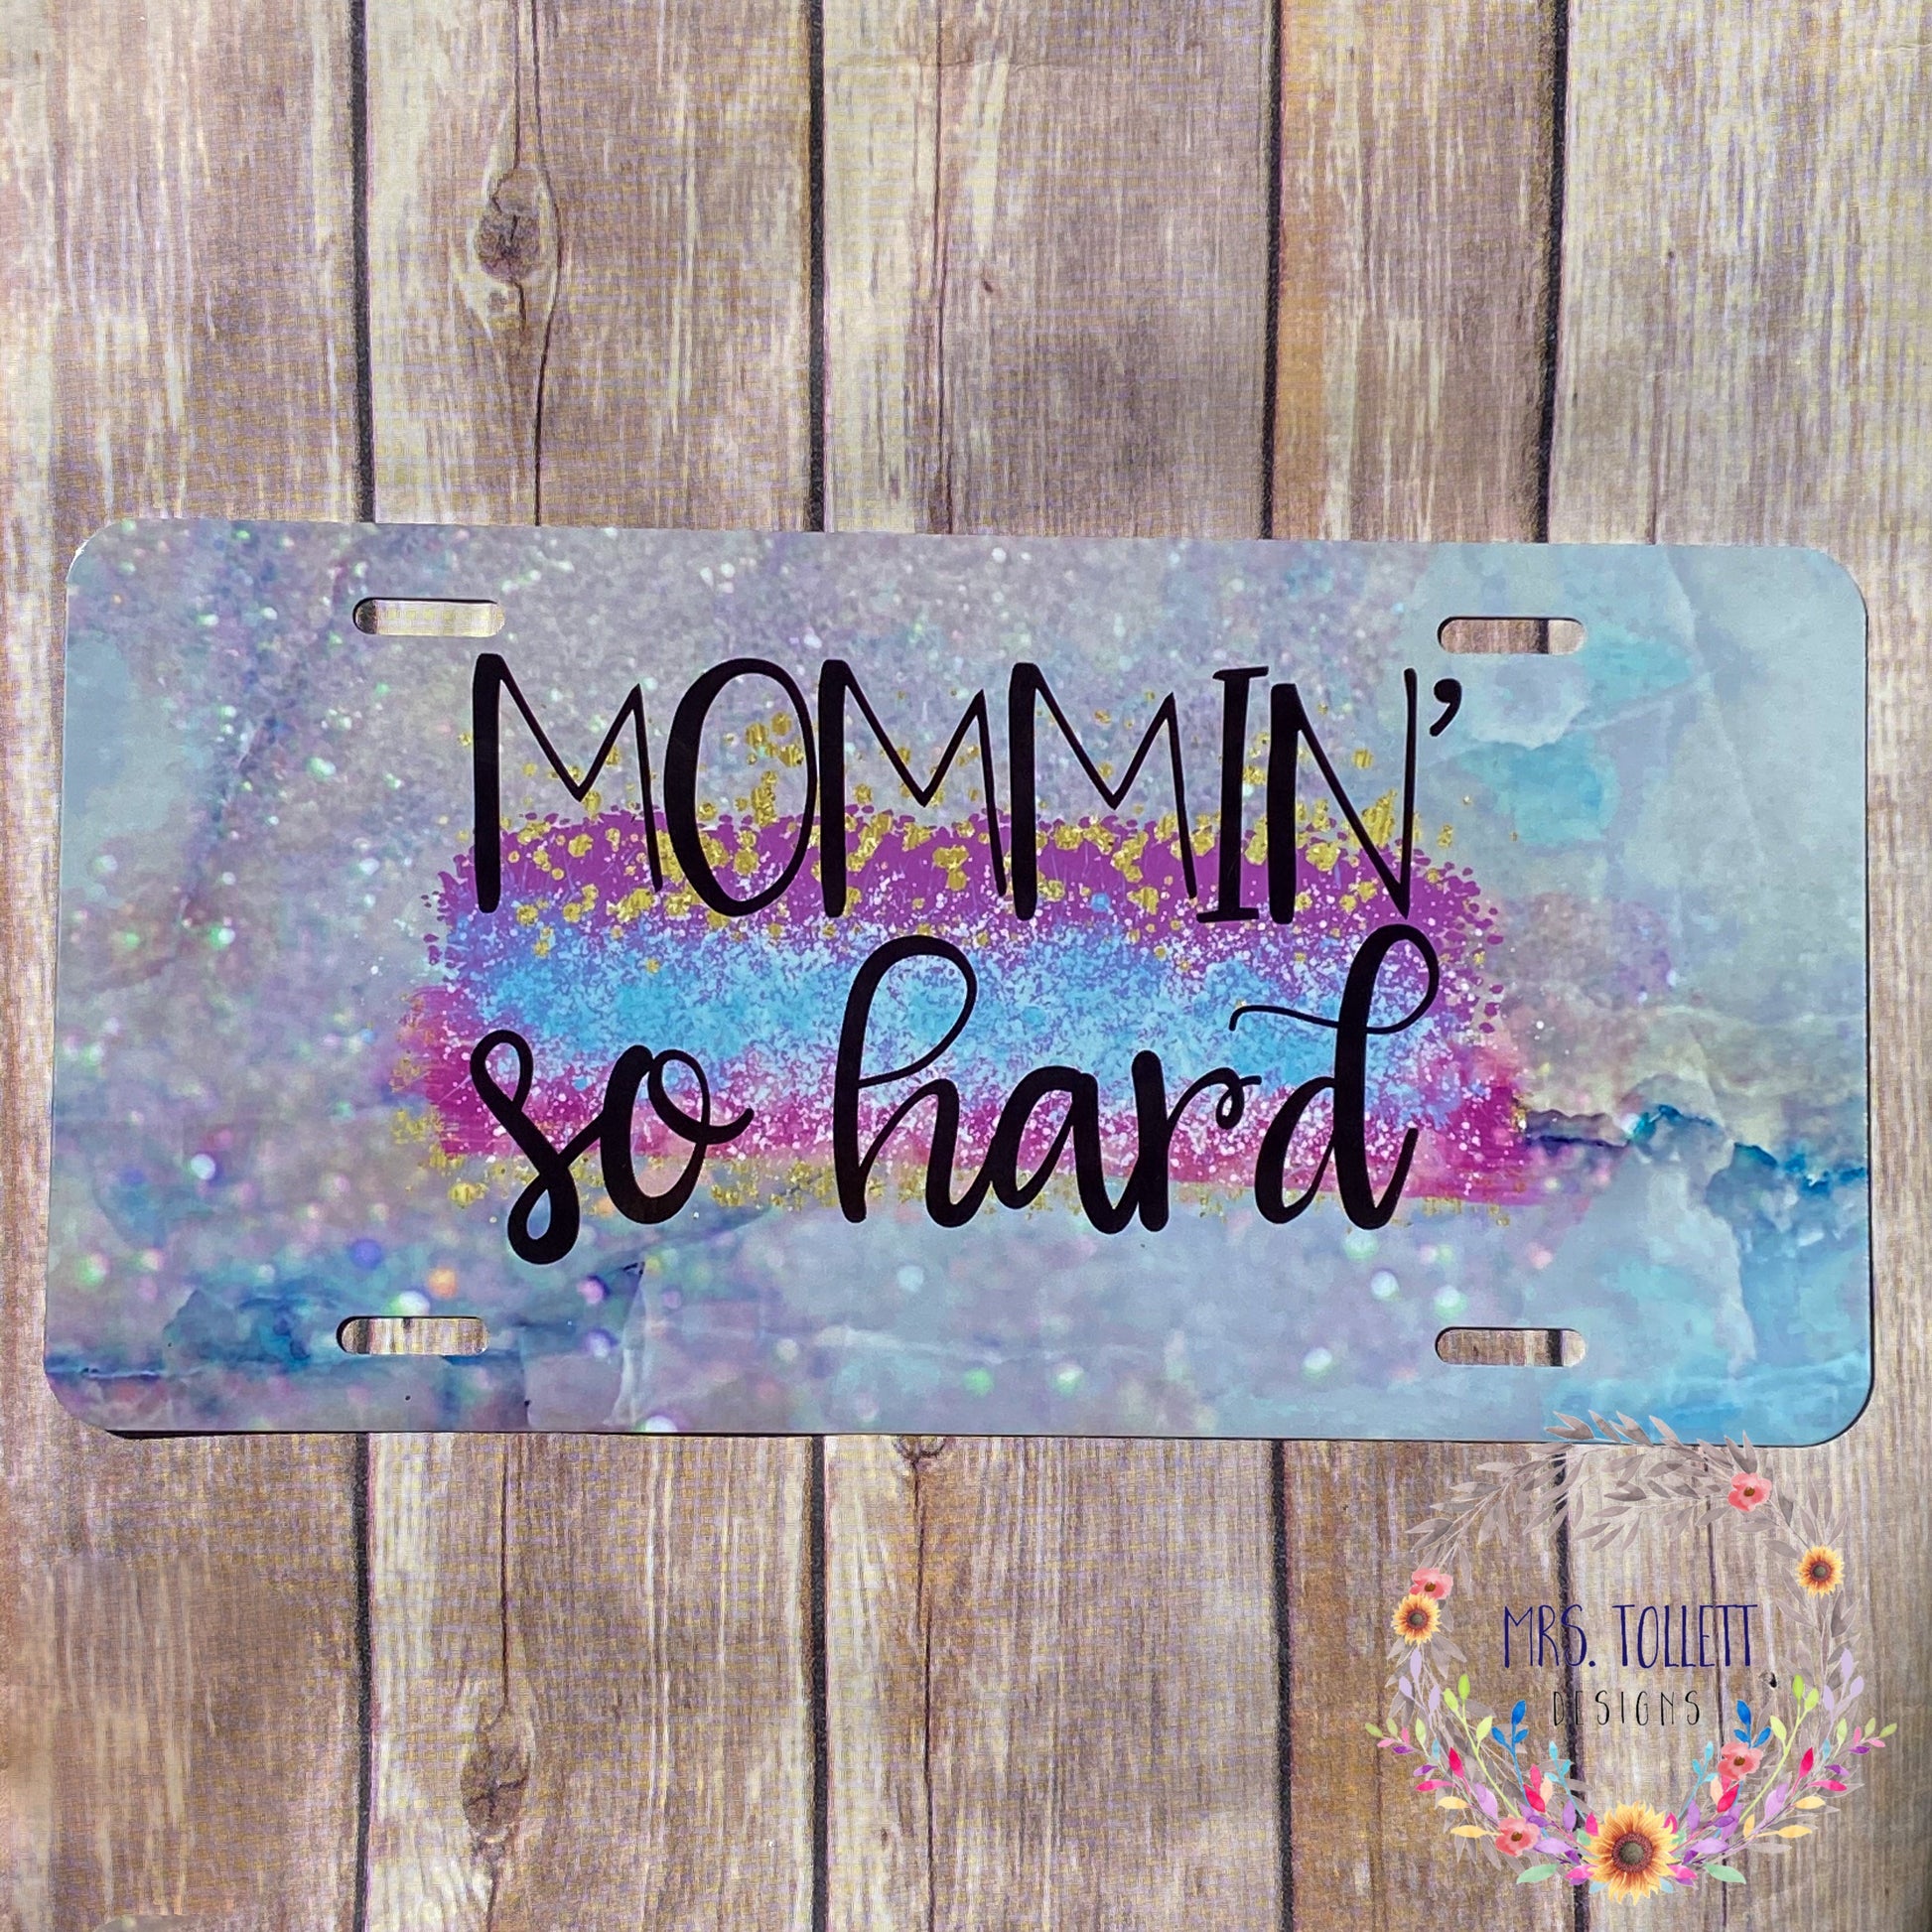 Front View - Mommin so hard Aluminum License Plate, Mom life Car Accessories | Mrs Tollett Designs